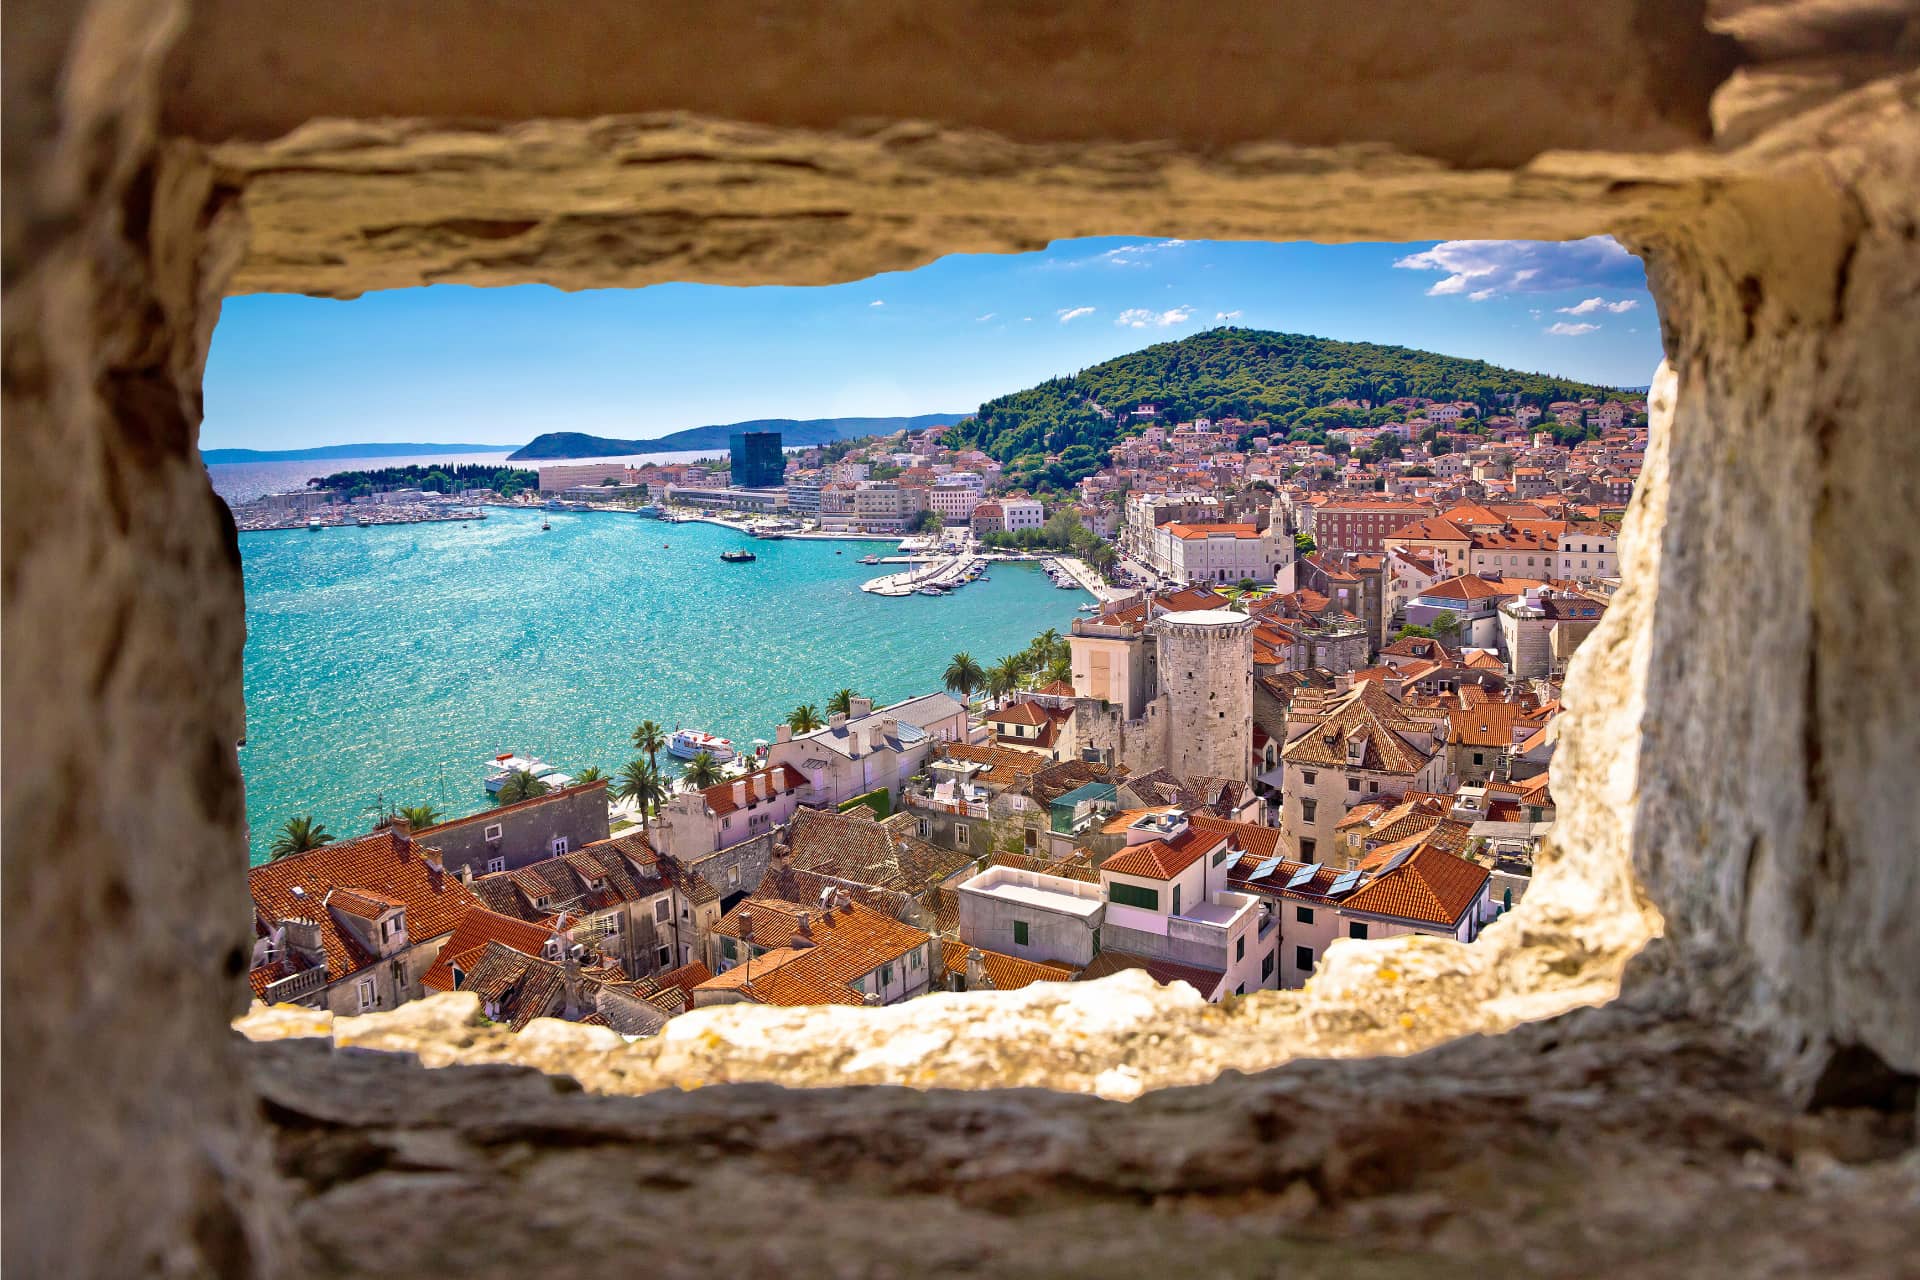 Awesome things to see in Split (and nearby) - RealCroatia